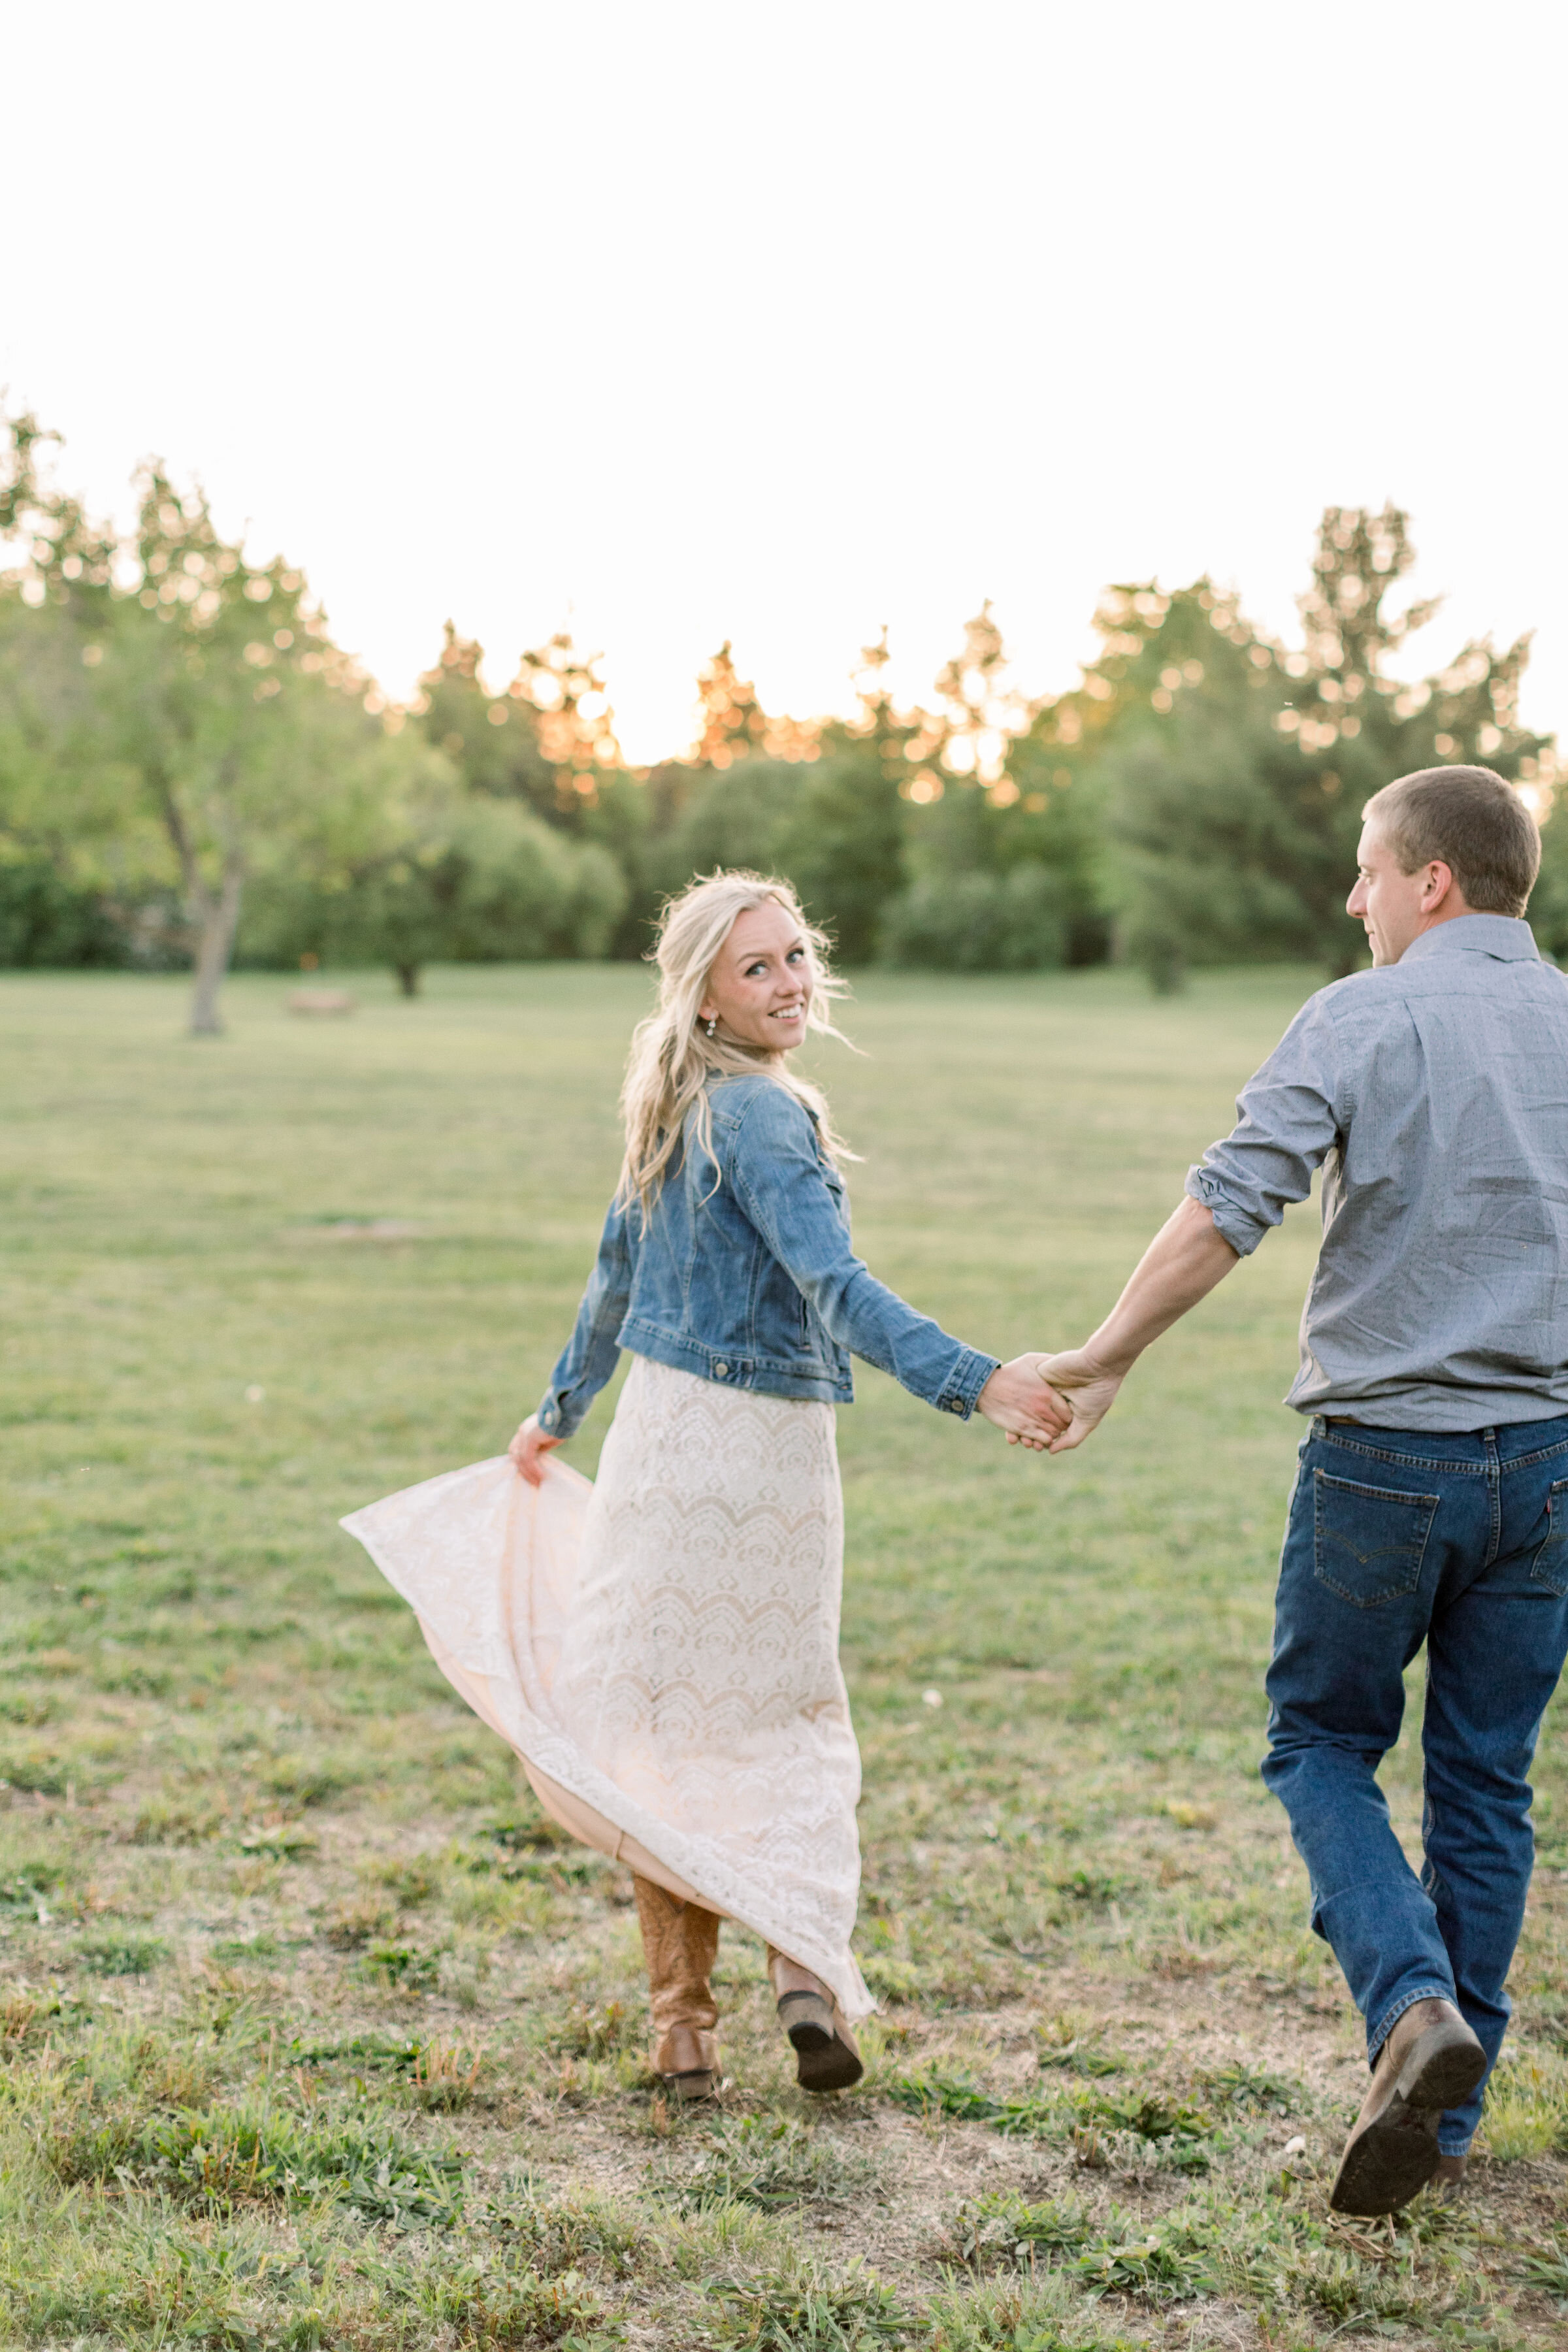  Ottawa, Canada engagement photographer, Chelsea Mason Photography captures a candid moment of this soon-to-be bride looking over her shoulder while holding hands with her fiancé. engagement photos Ottawa photographer women's cowgirl boots #ChelseaMa